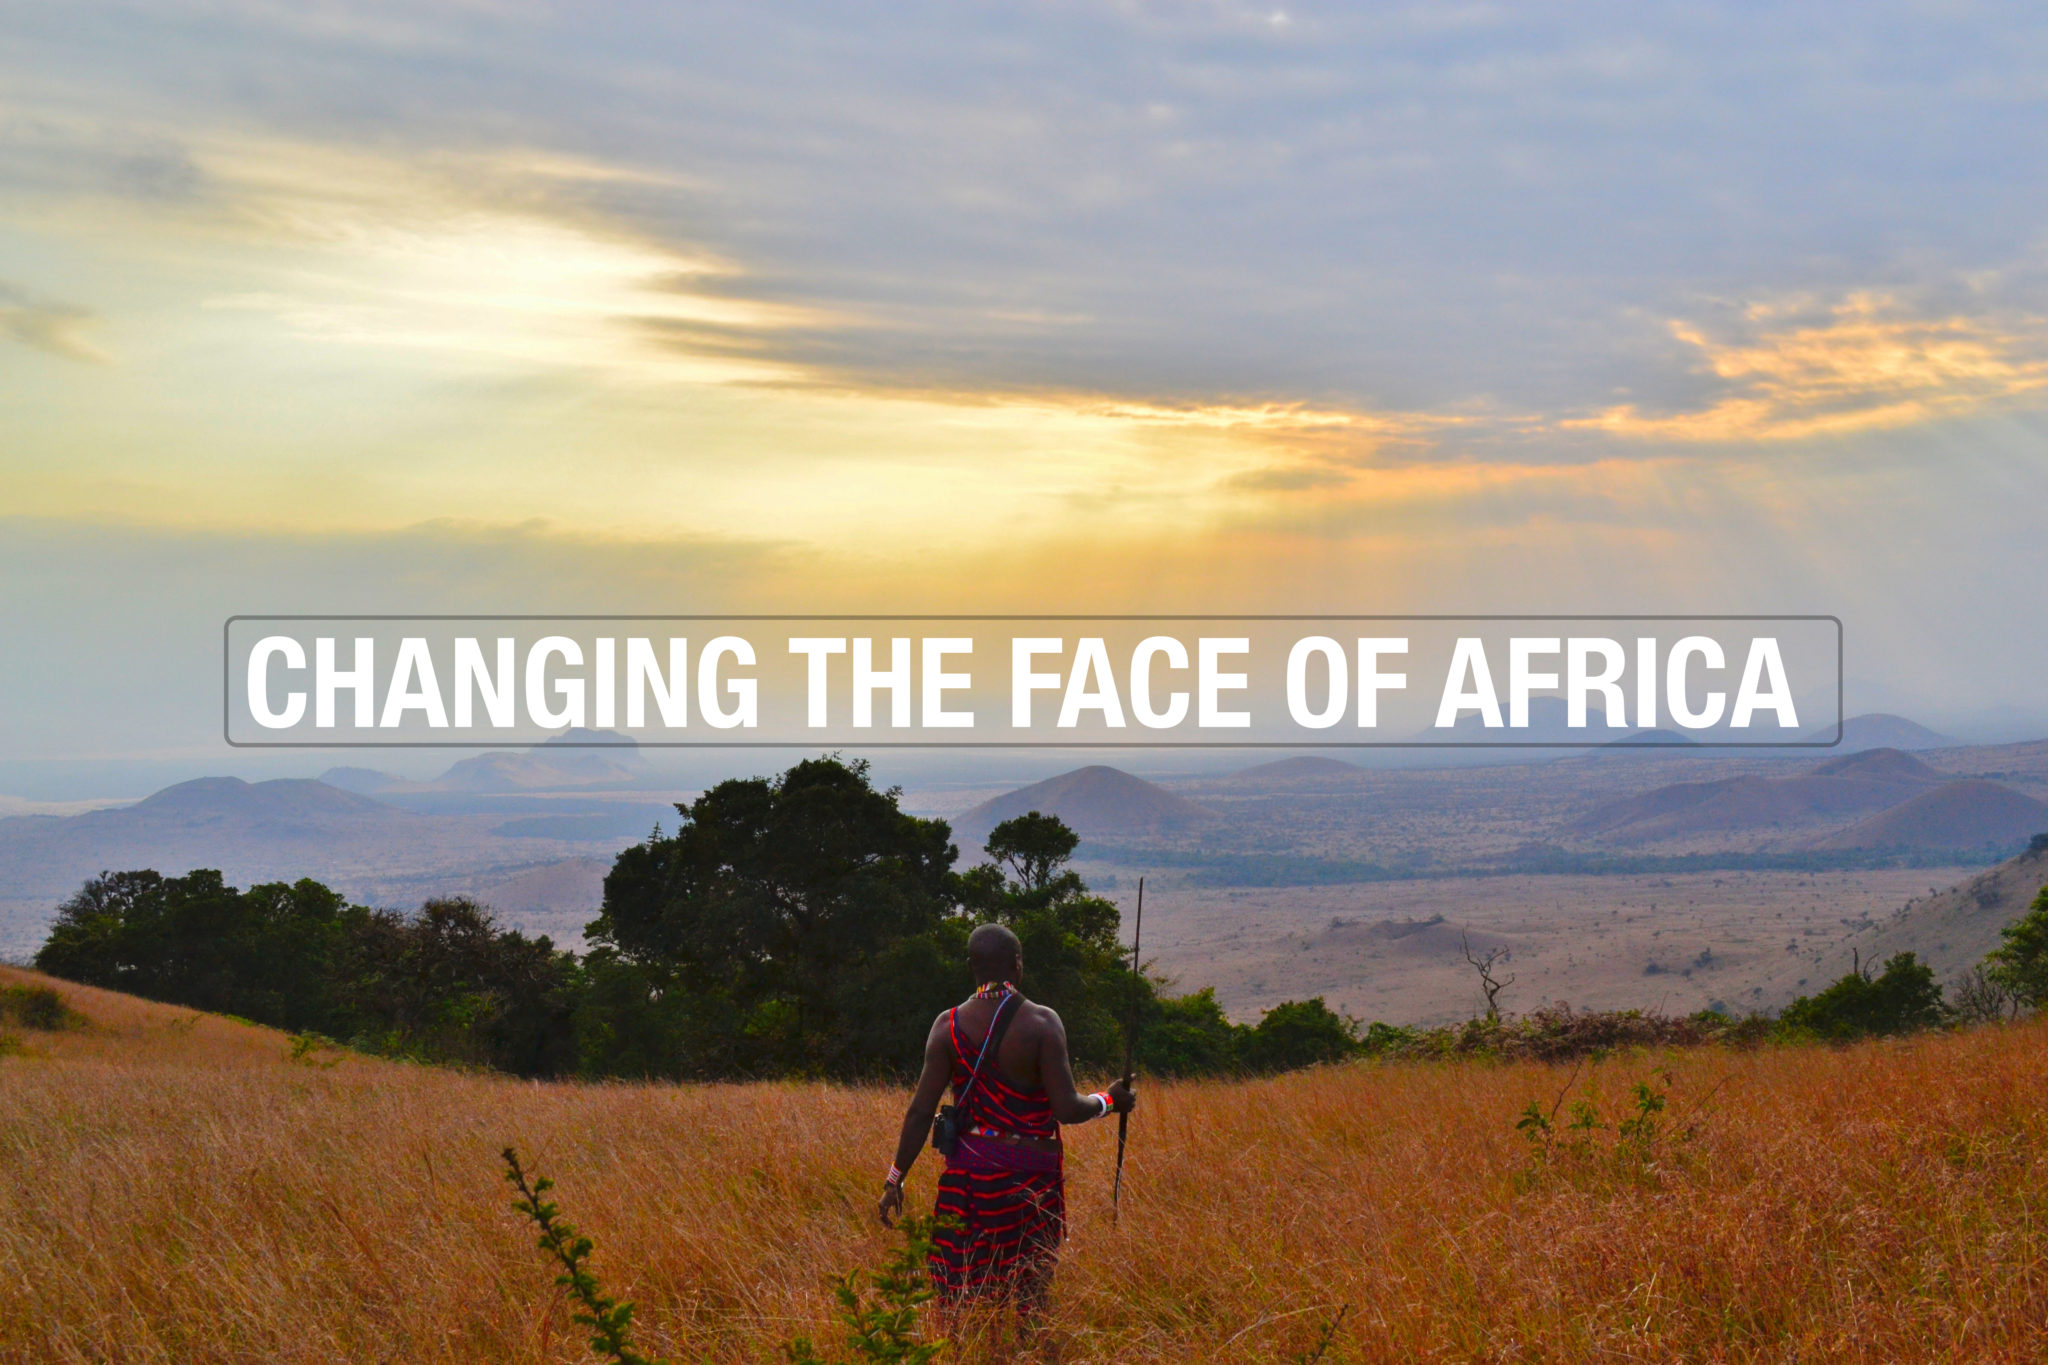 CHANGING THE FACE OF AFRICA